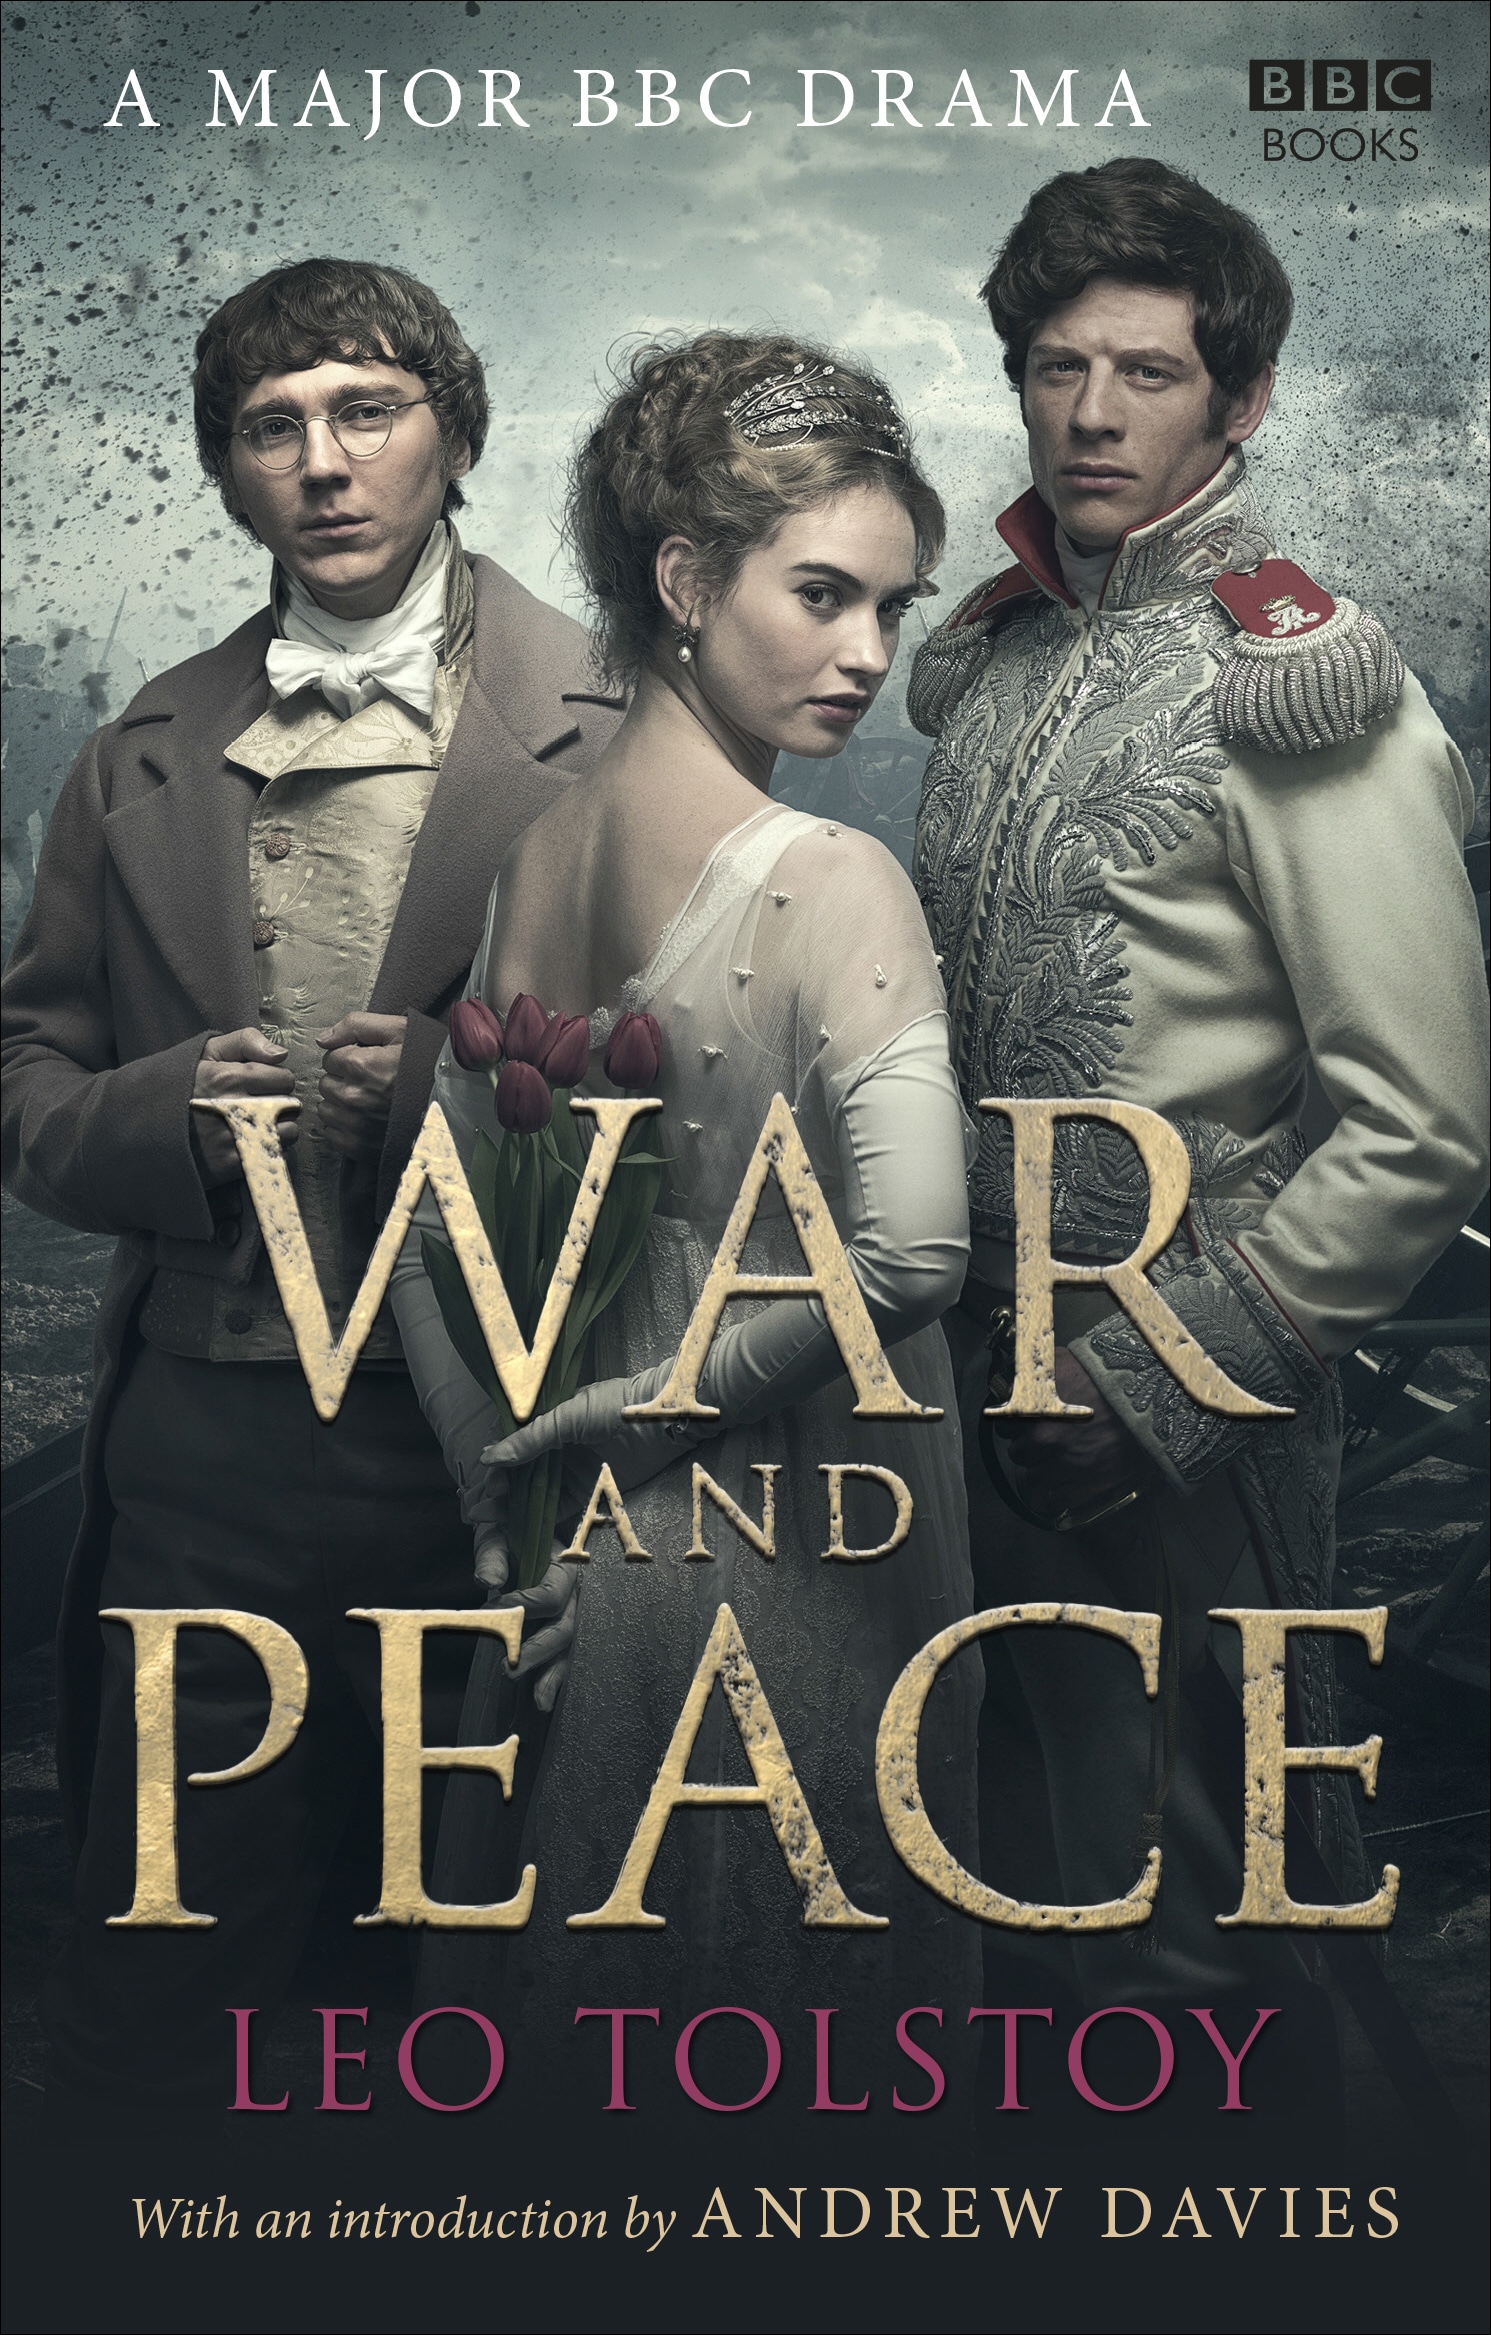 Book “War and Peace” by Leo Tolstoy — December 31, 2015